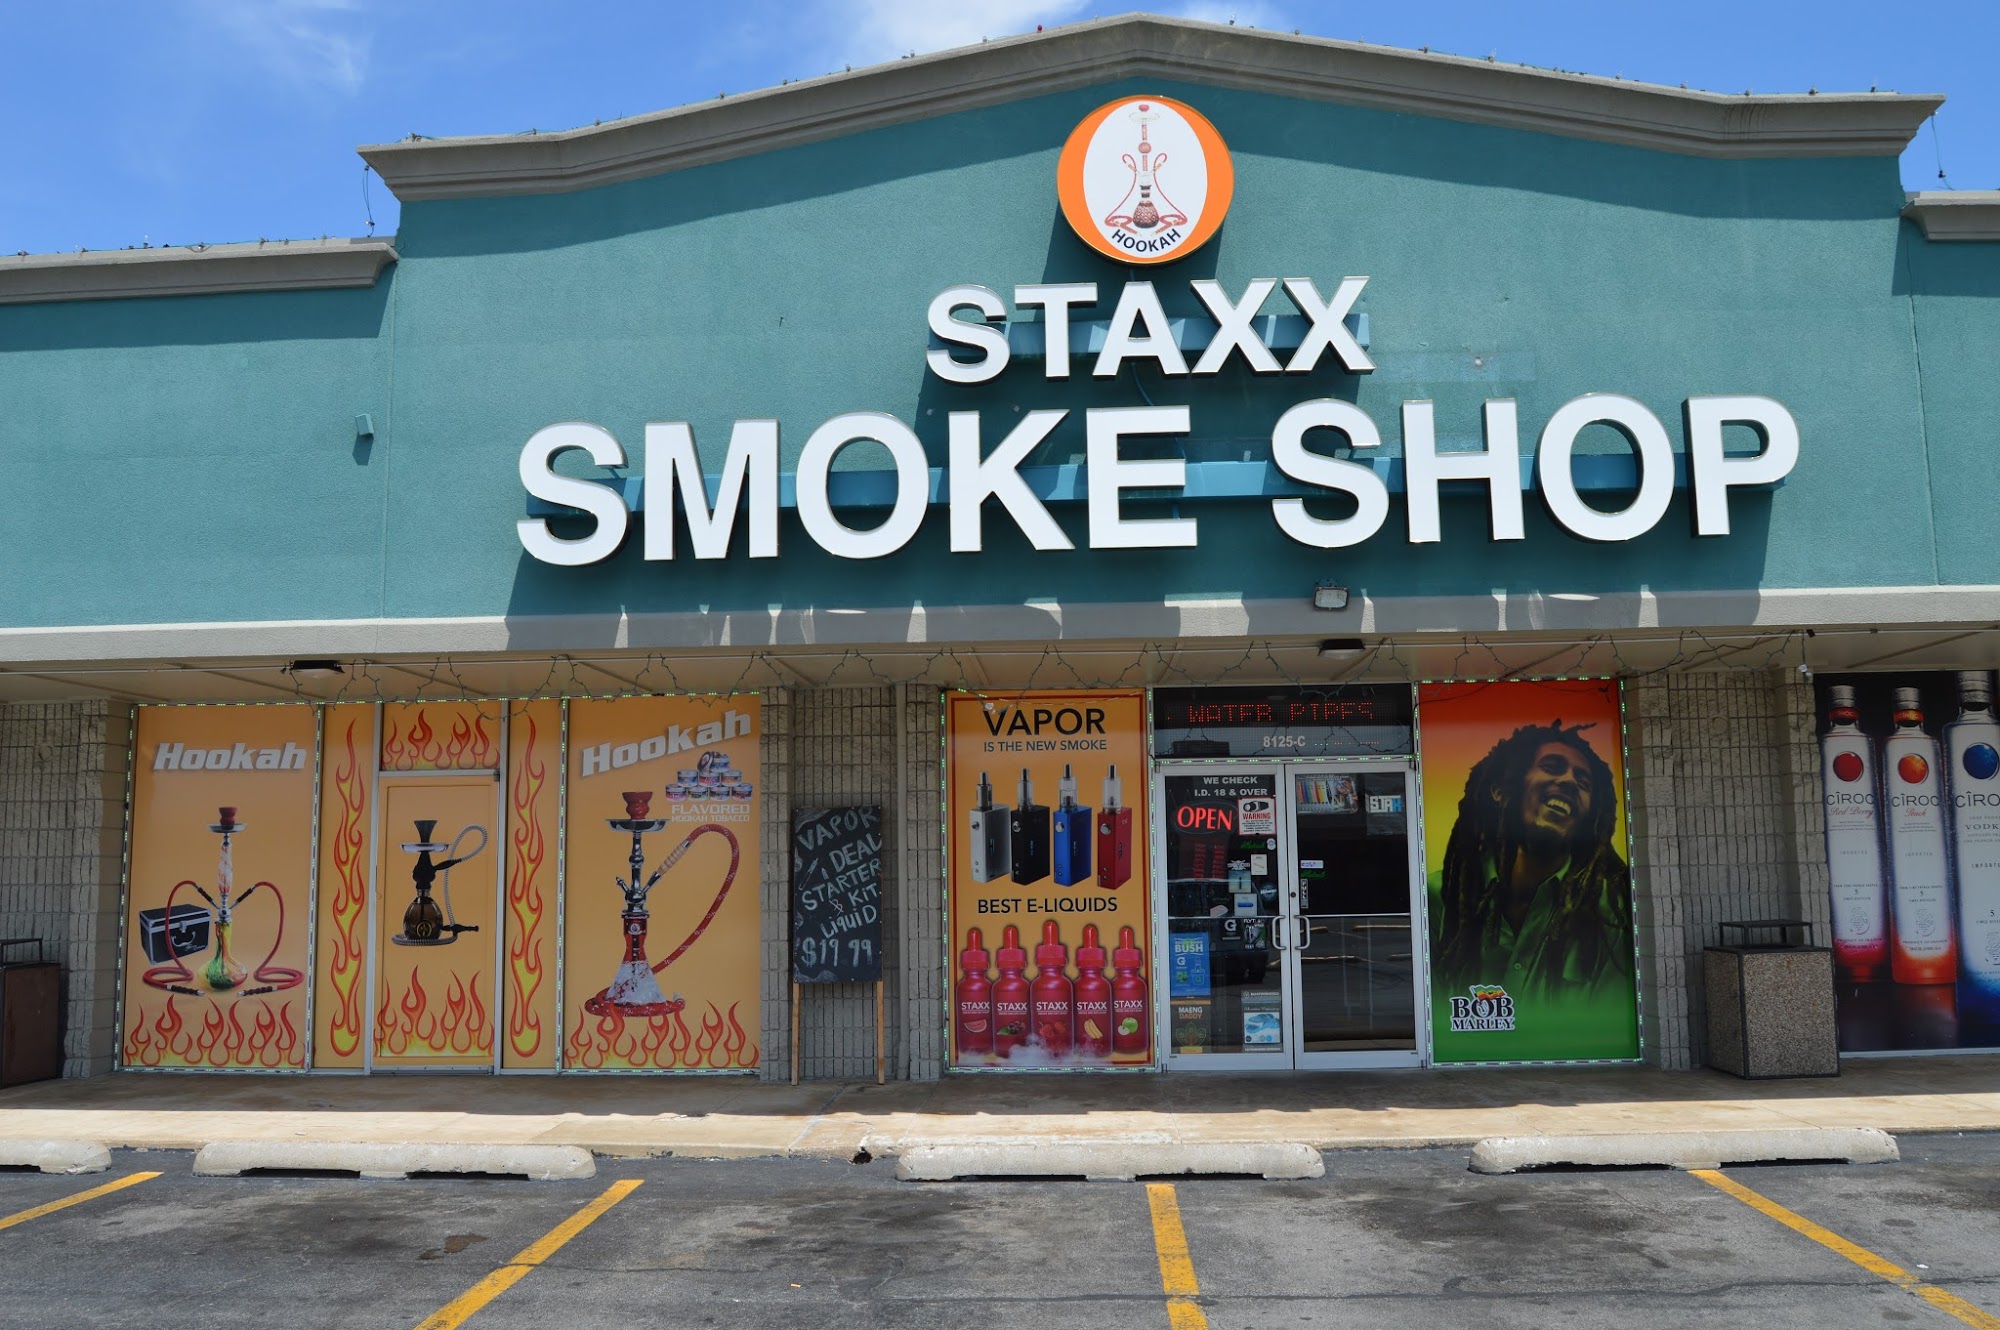 STAXX Smoke and Gift Shop